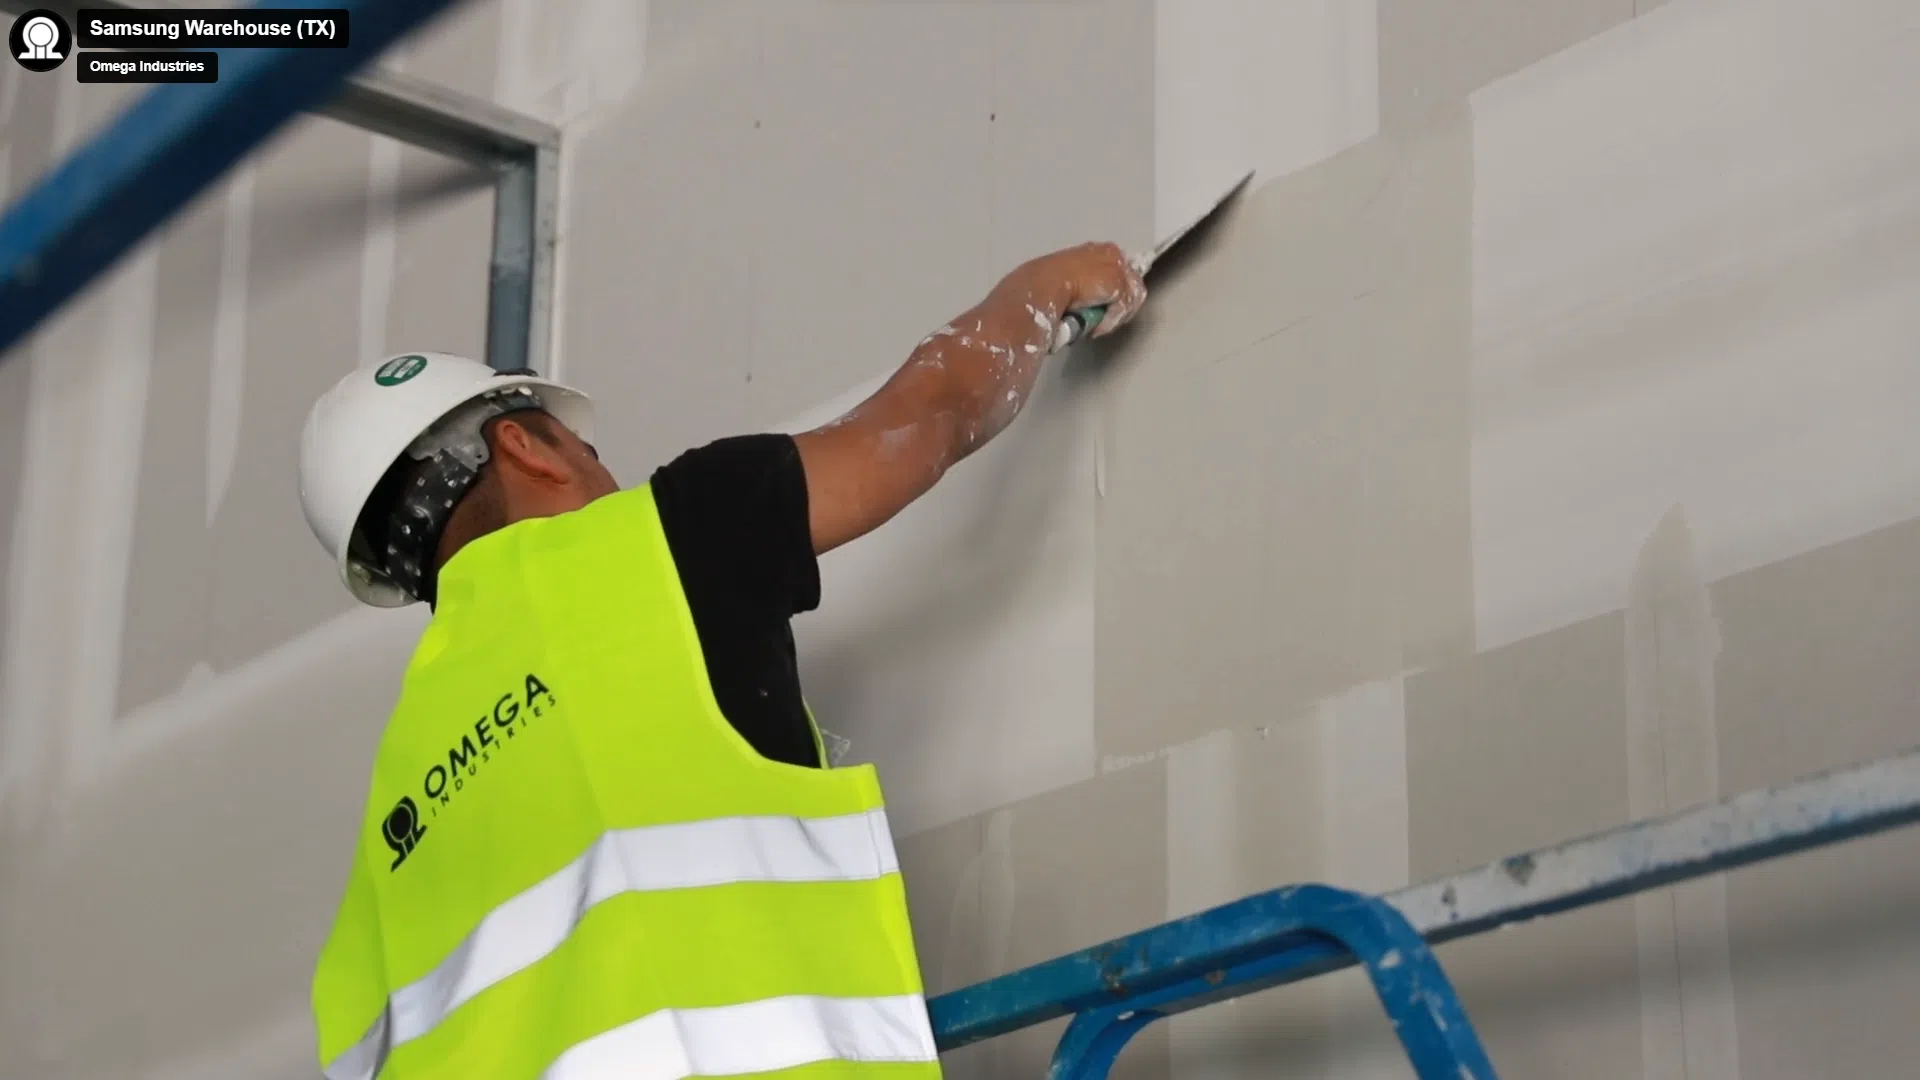 Omega's commercial drywall contractors